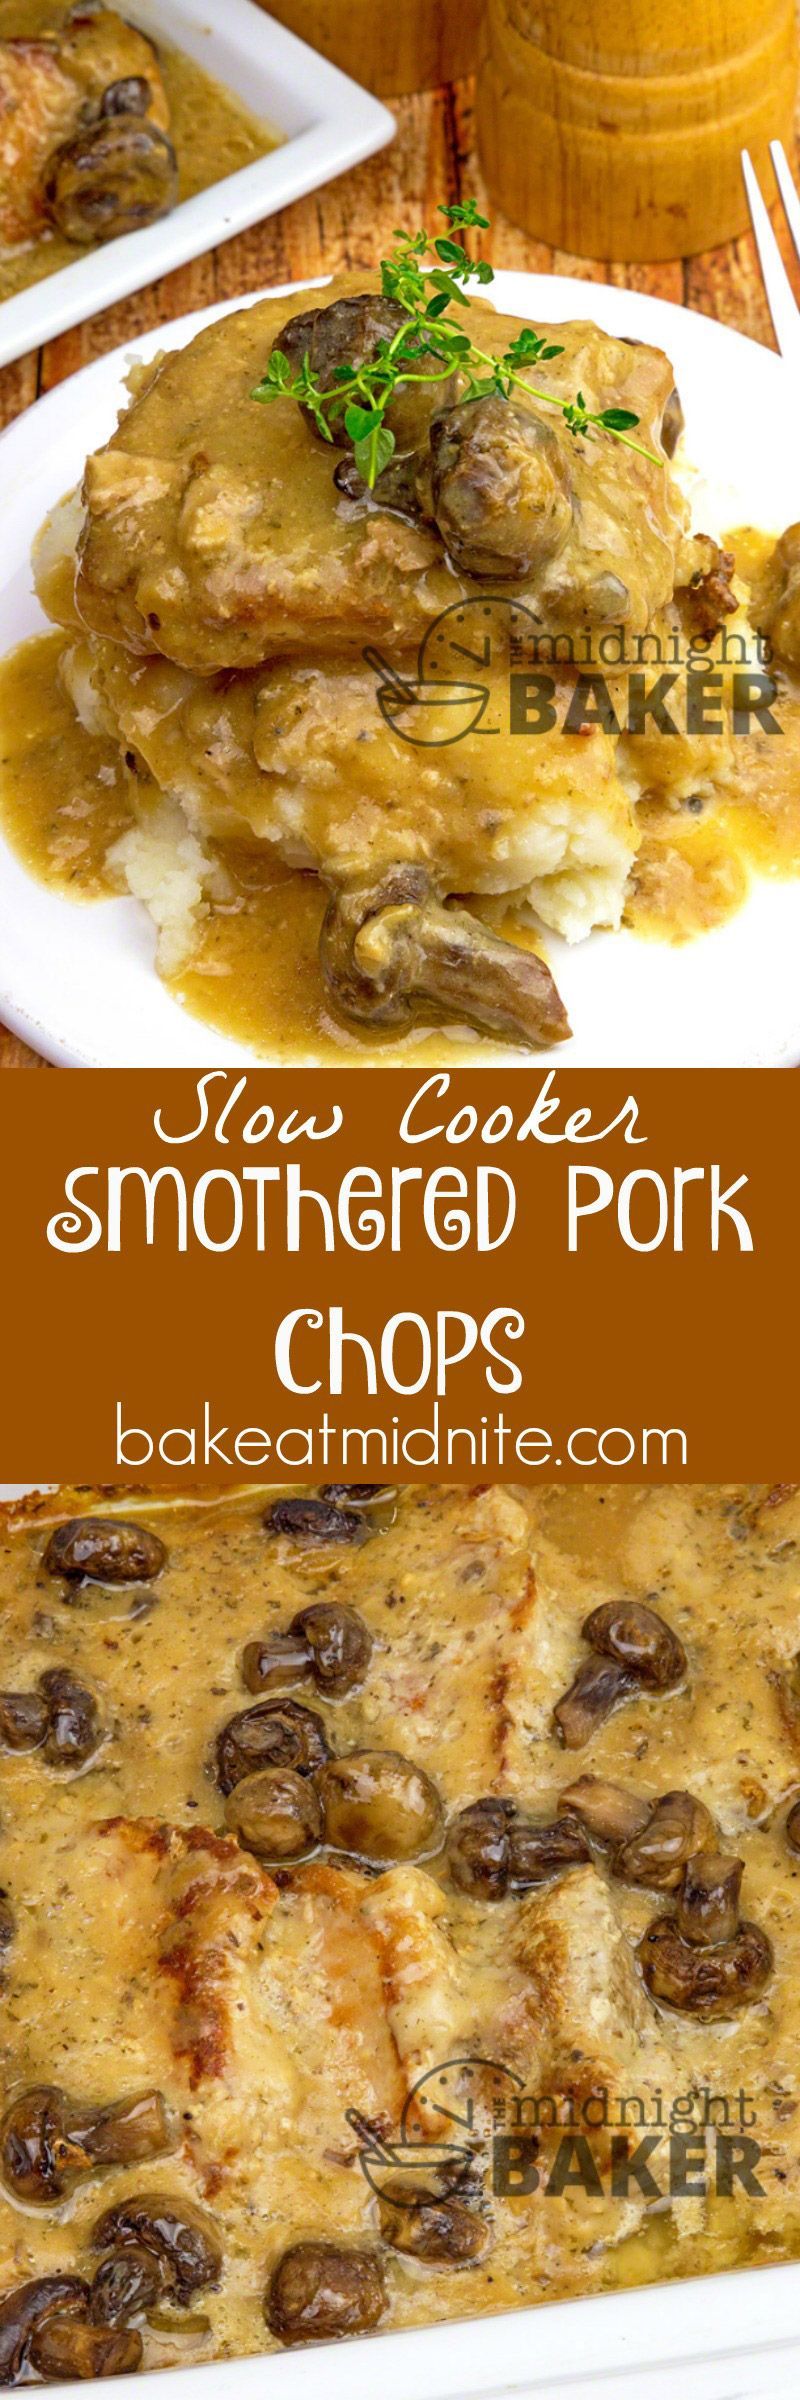 Pork chops smothered in an awesome gravy. Easy to make in the slow cooker.